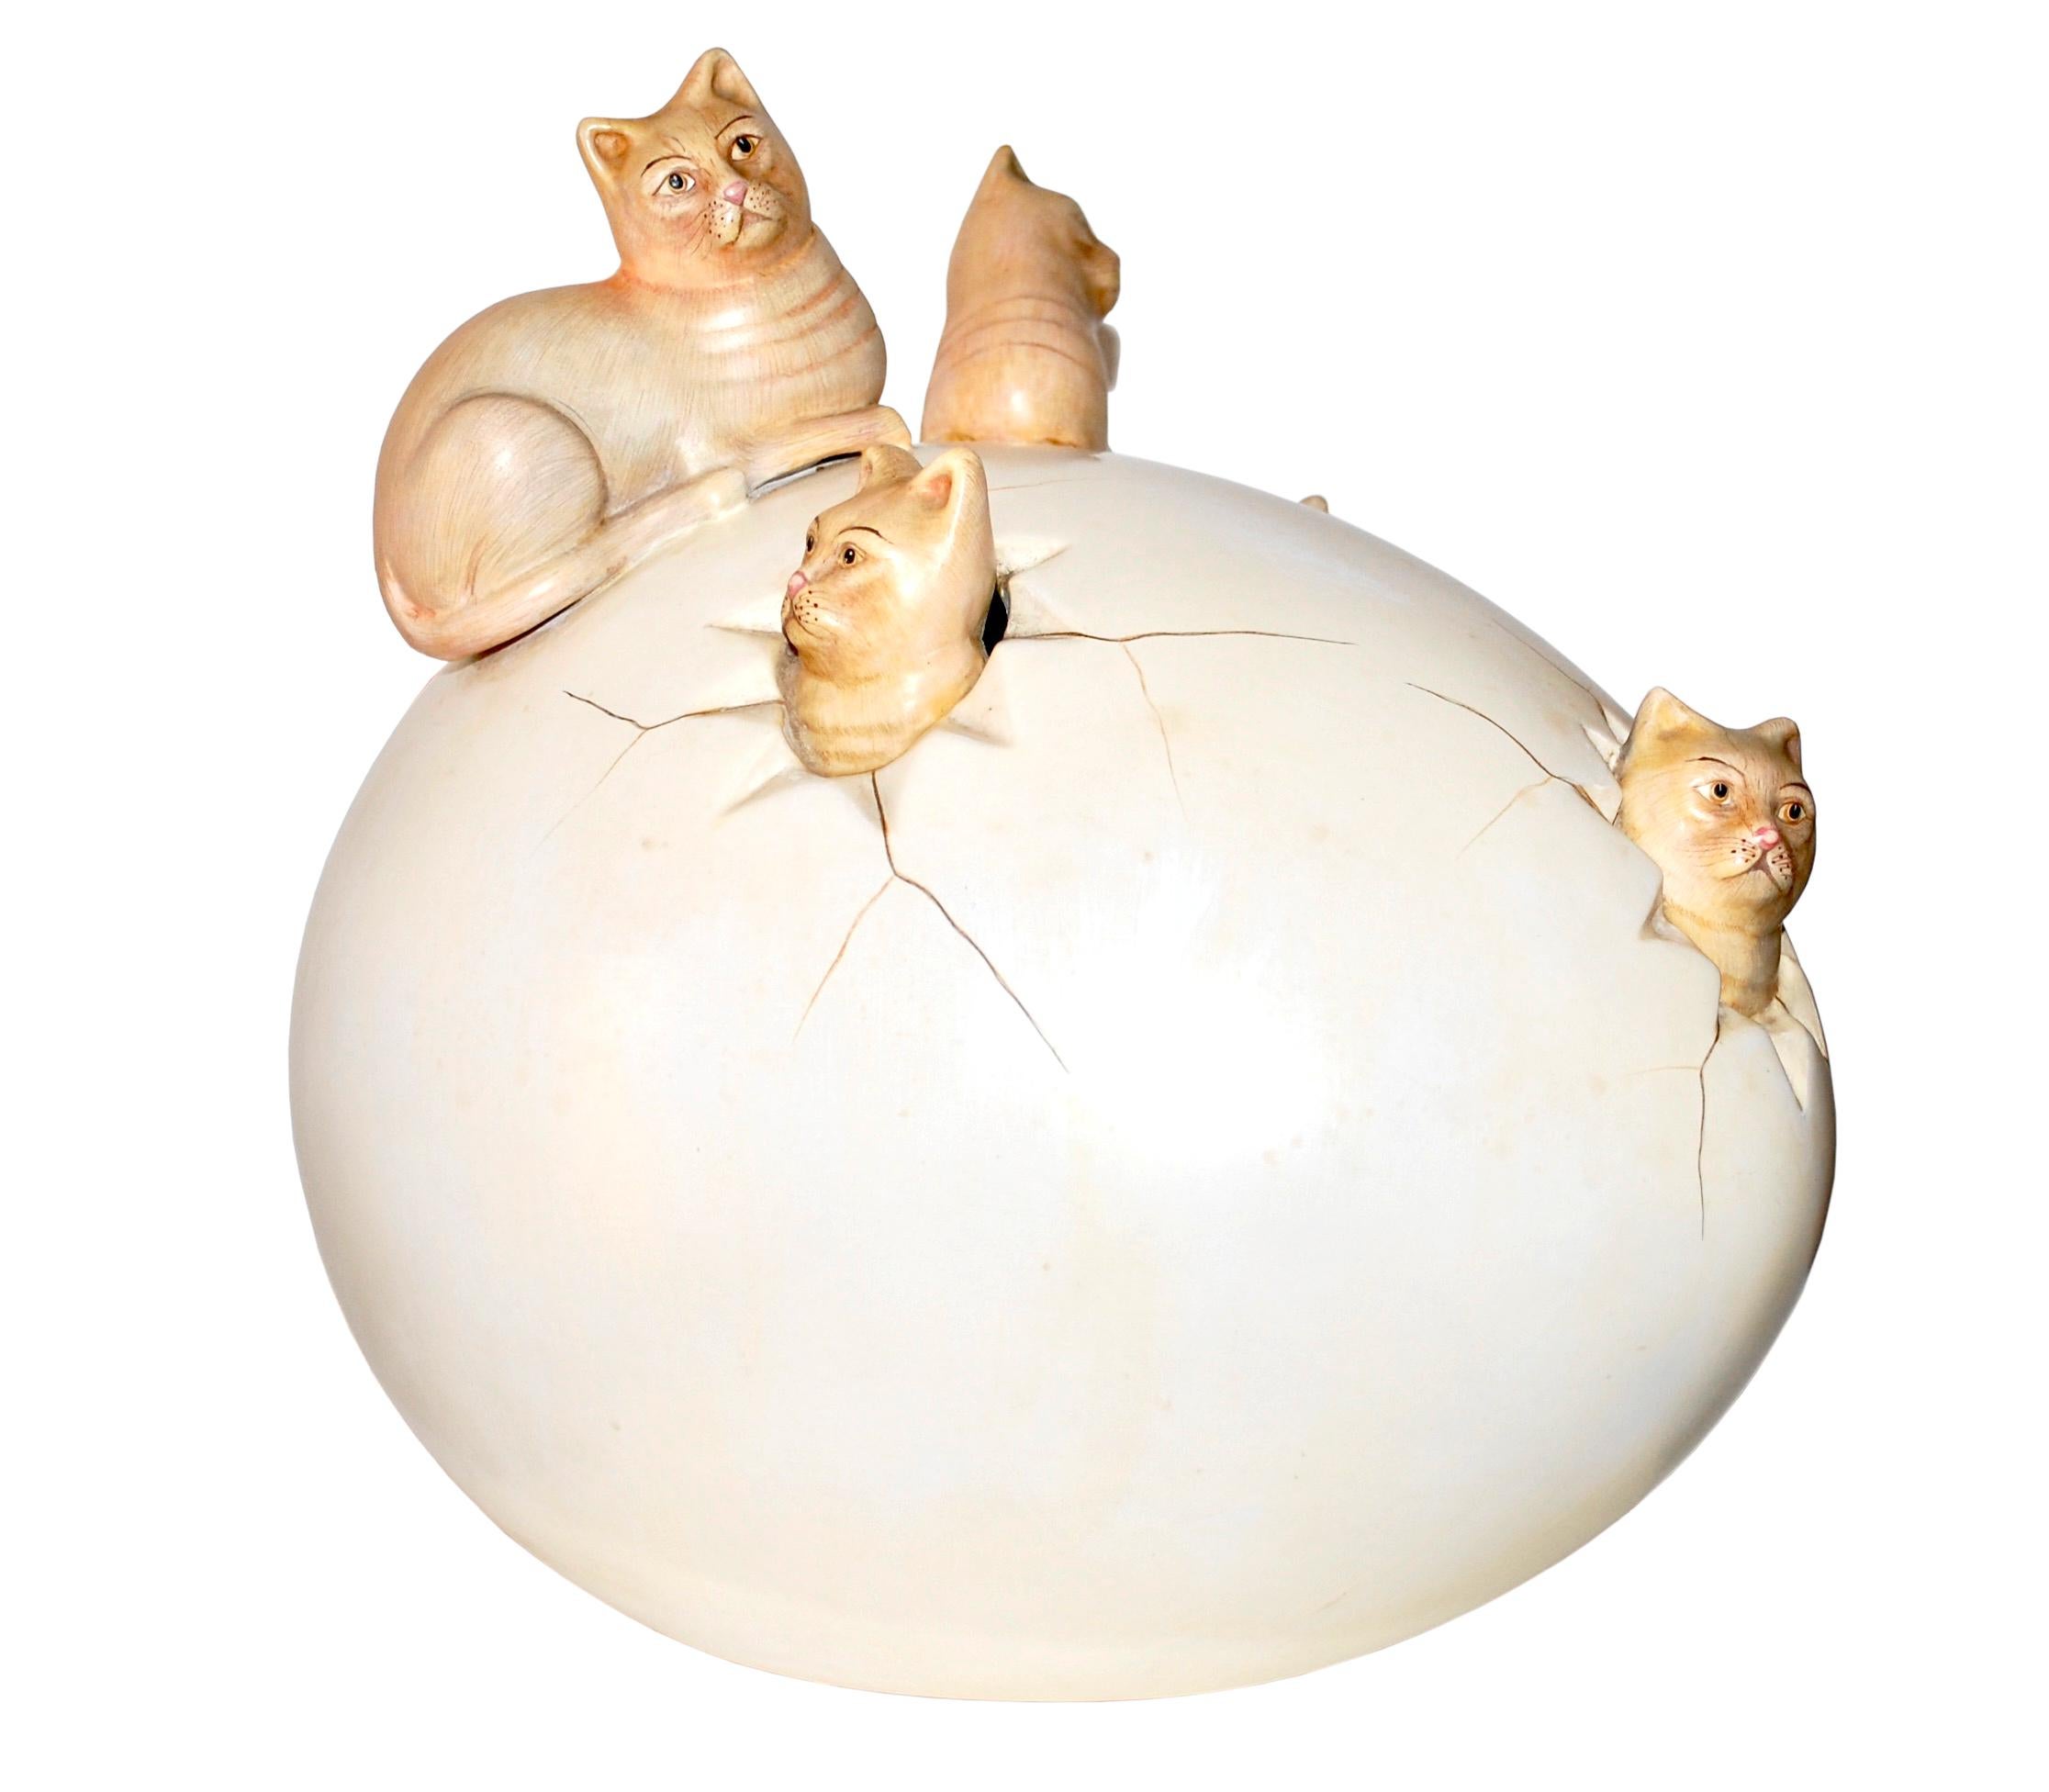 Cats hatching from egg.
Ceramic sculpture, artist signed.
Sergio Bustamante is a Mexican Artist and sculptor. Bustamante was born in Culiacan, Sinaloa in 1949 and studied architecture at the University of Guadalajara.
Bustamante's first art